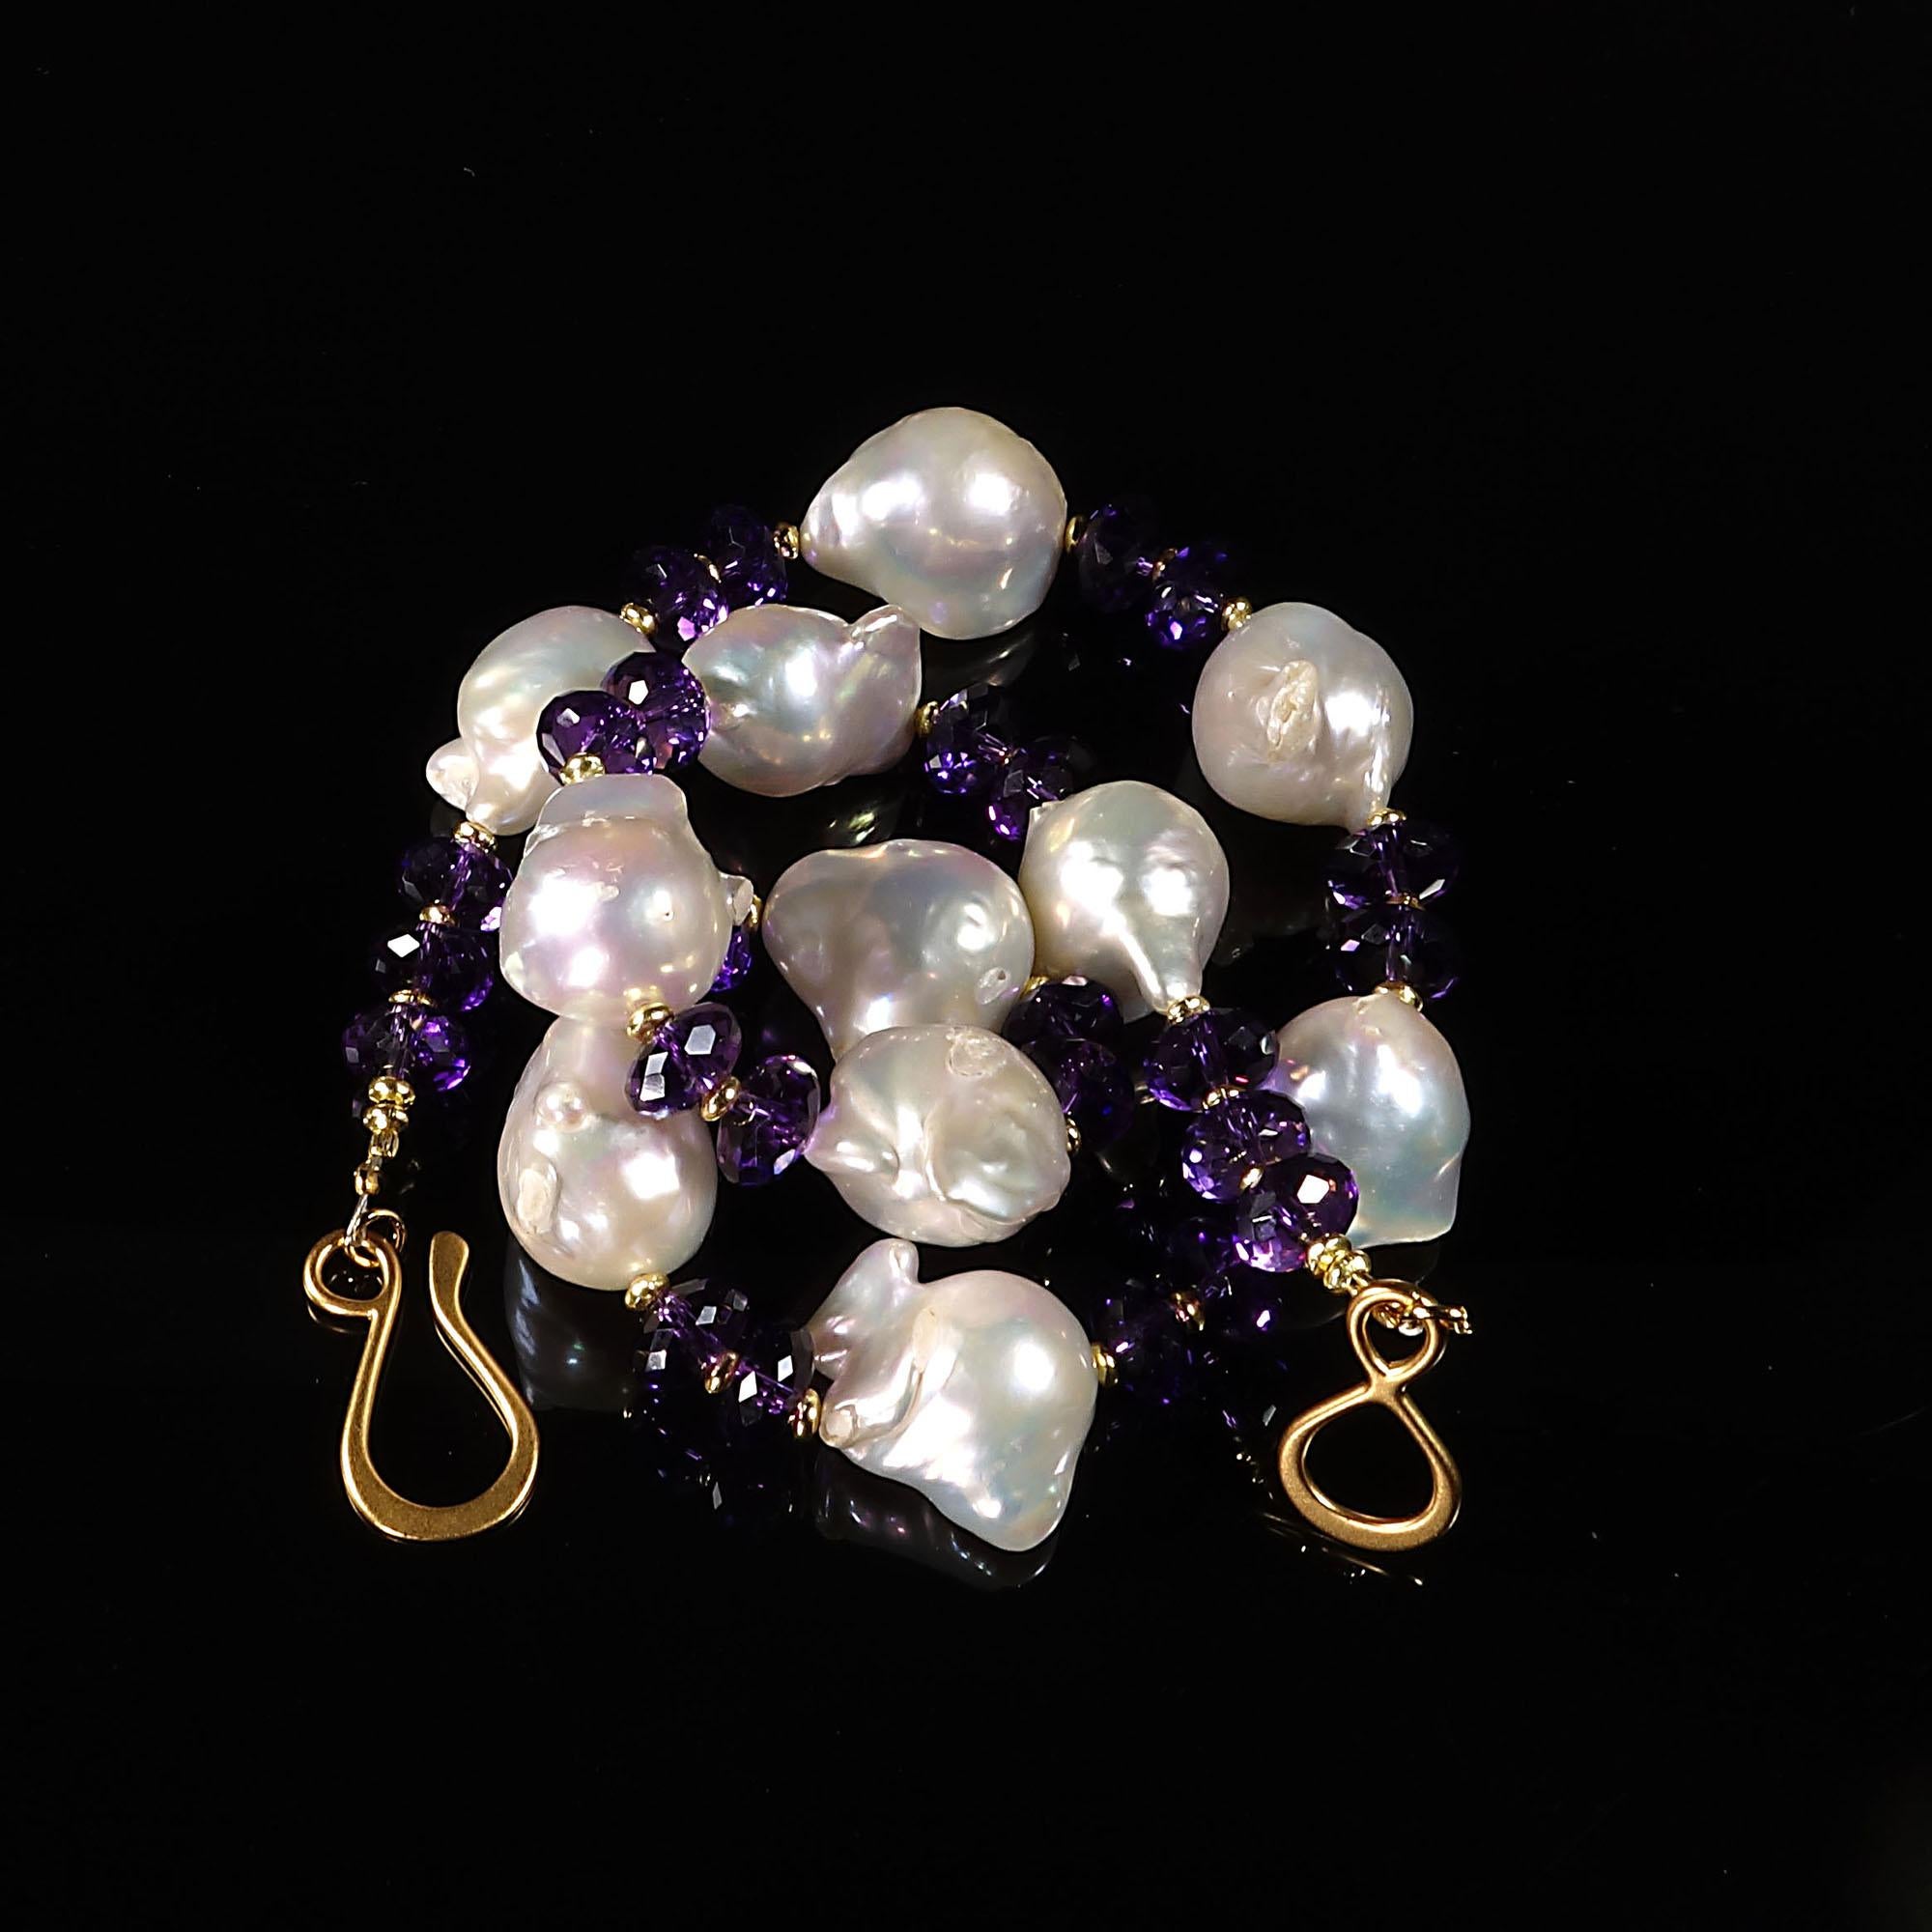 Women's or Men's Gemjunky Sophisticated Purple Amethyst and White Baroque Pearl Choker Necklace